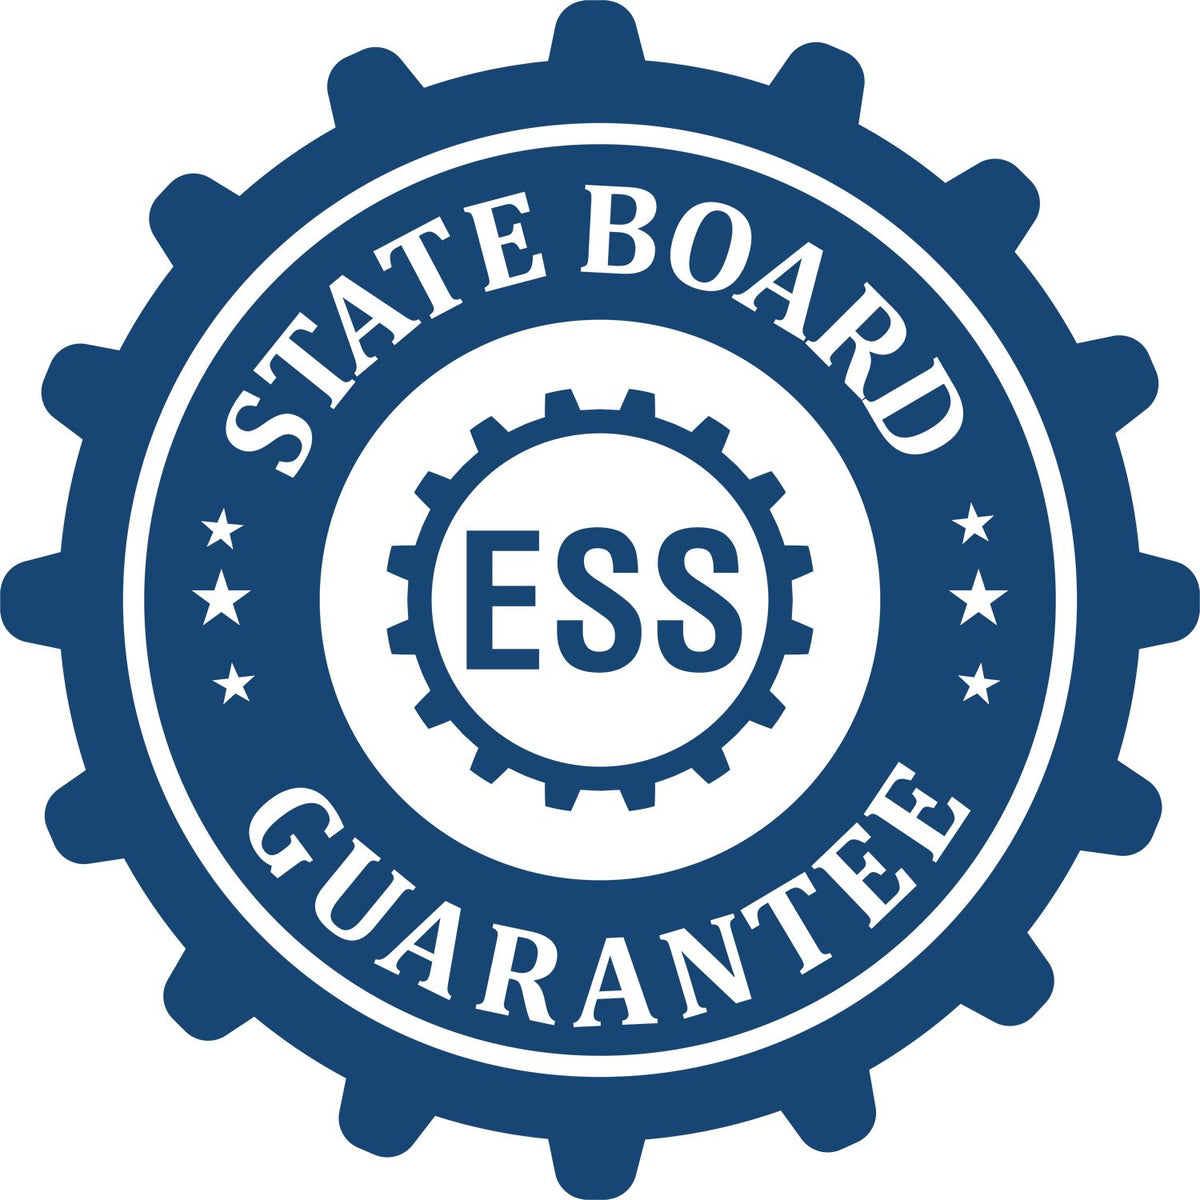 An emblem in a gear shape illustrating a state board guarantee for the Heavy-Duty Puerto Rico Rectangular Notary Stamp product.